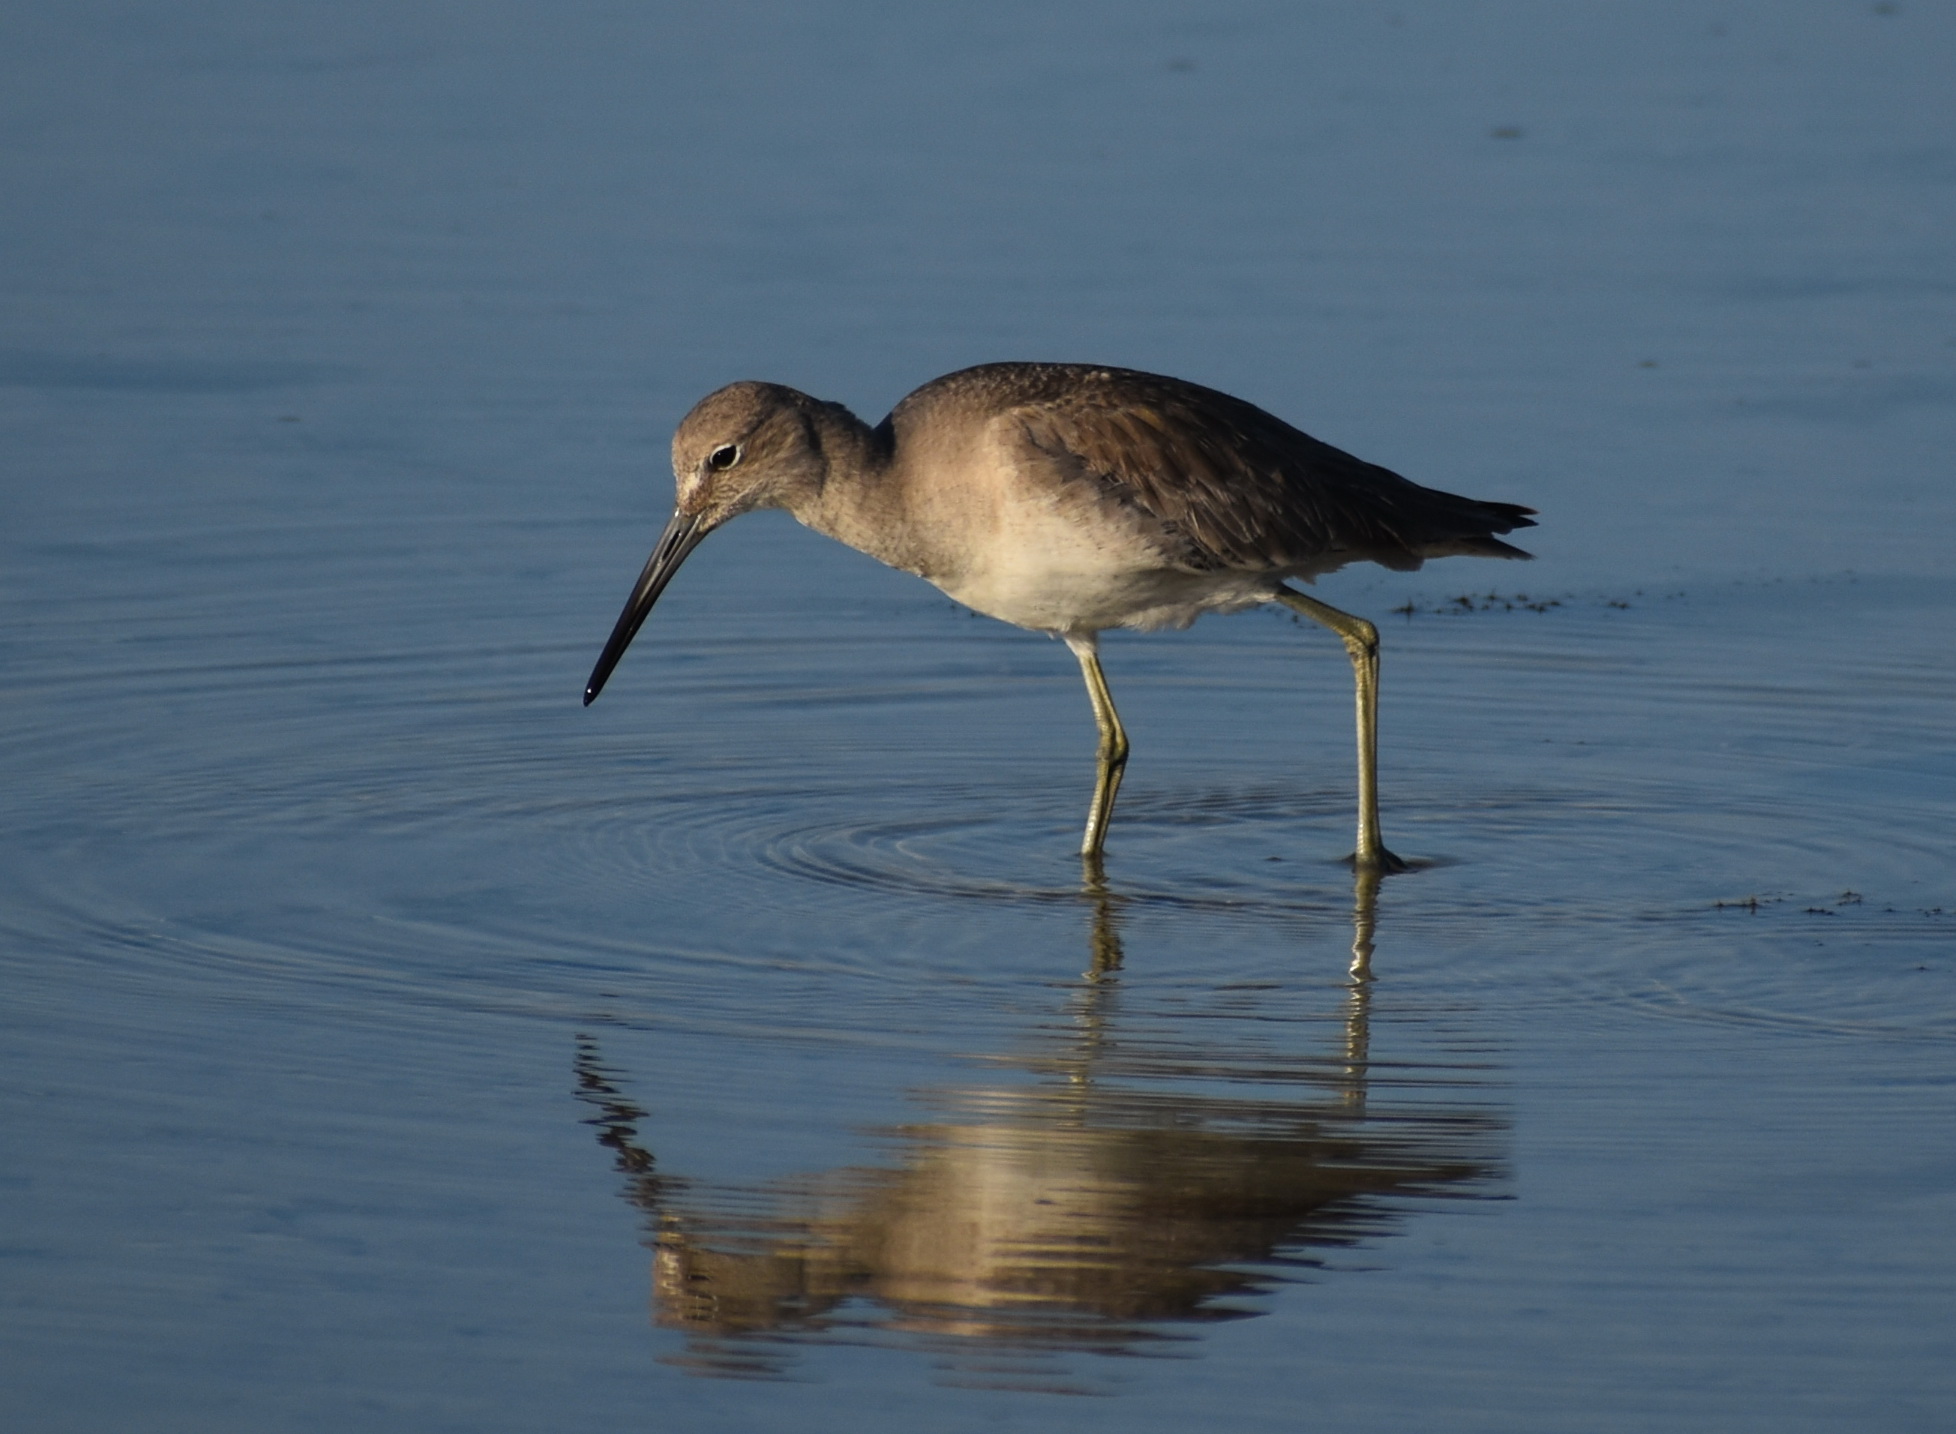 A wading bird standing in shallow water